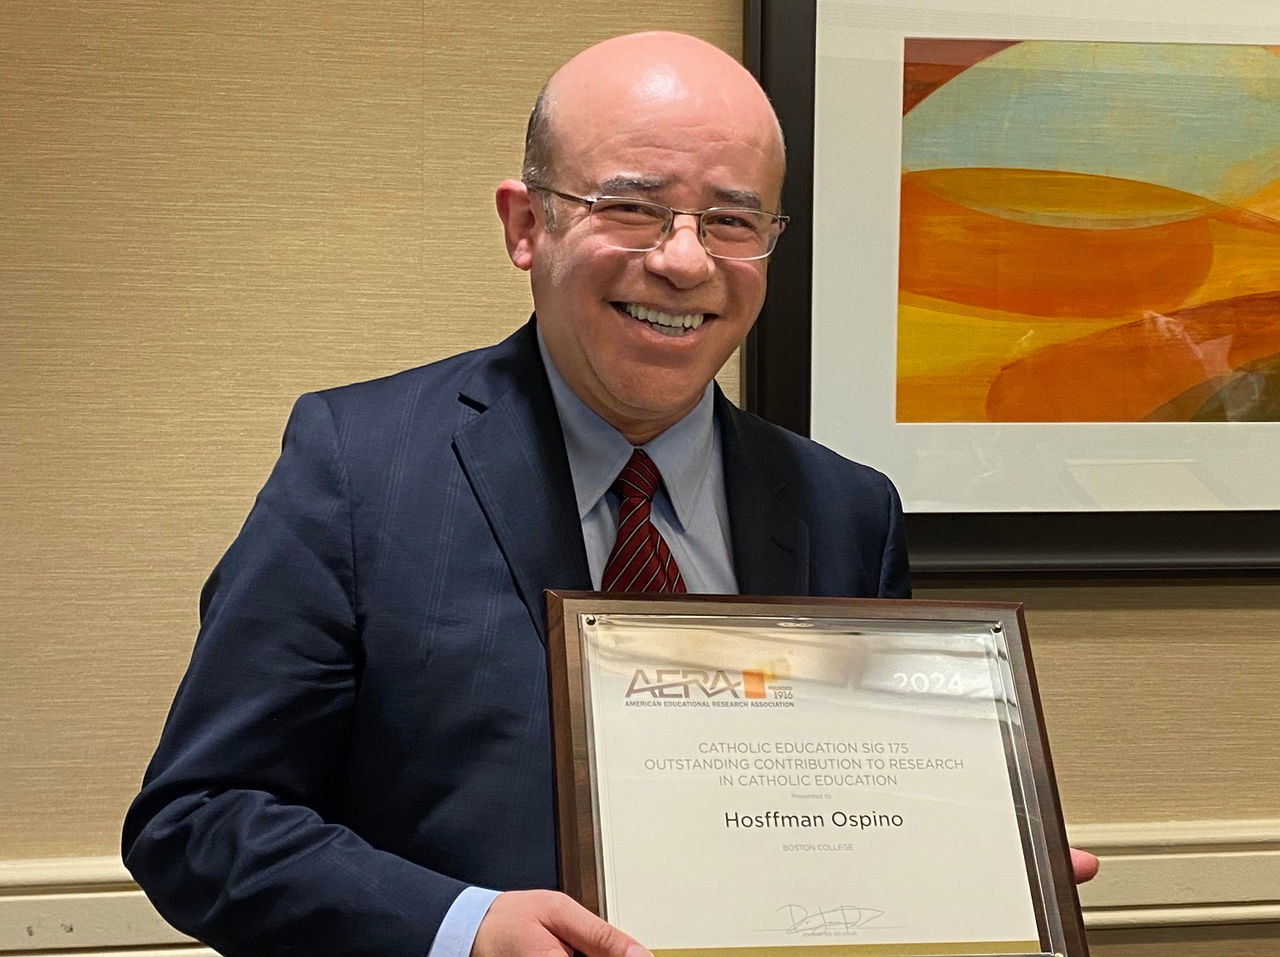 Prof. Hoffsman Ospino, and Chair of Religious Education and Pastoral Ministry (CSTM) is presented with the award for Outstanding contribution to research in Catholic education. by the American Educational Research Association..
Provided photo